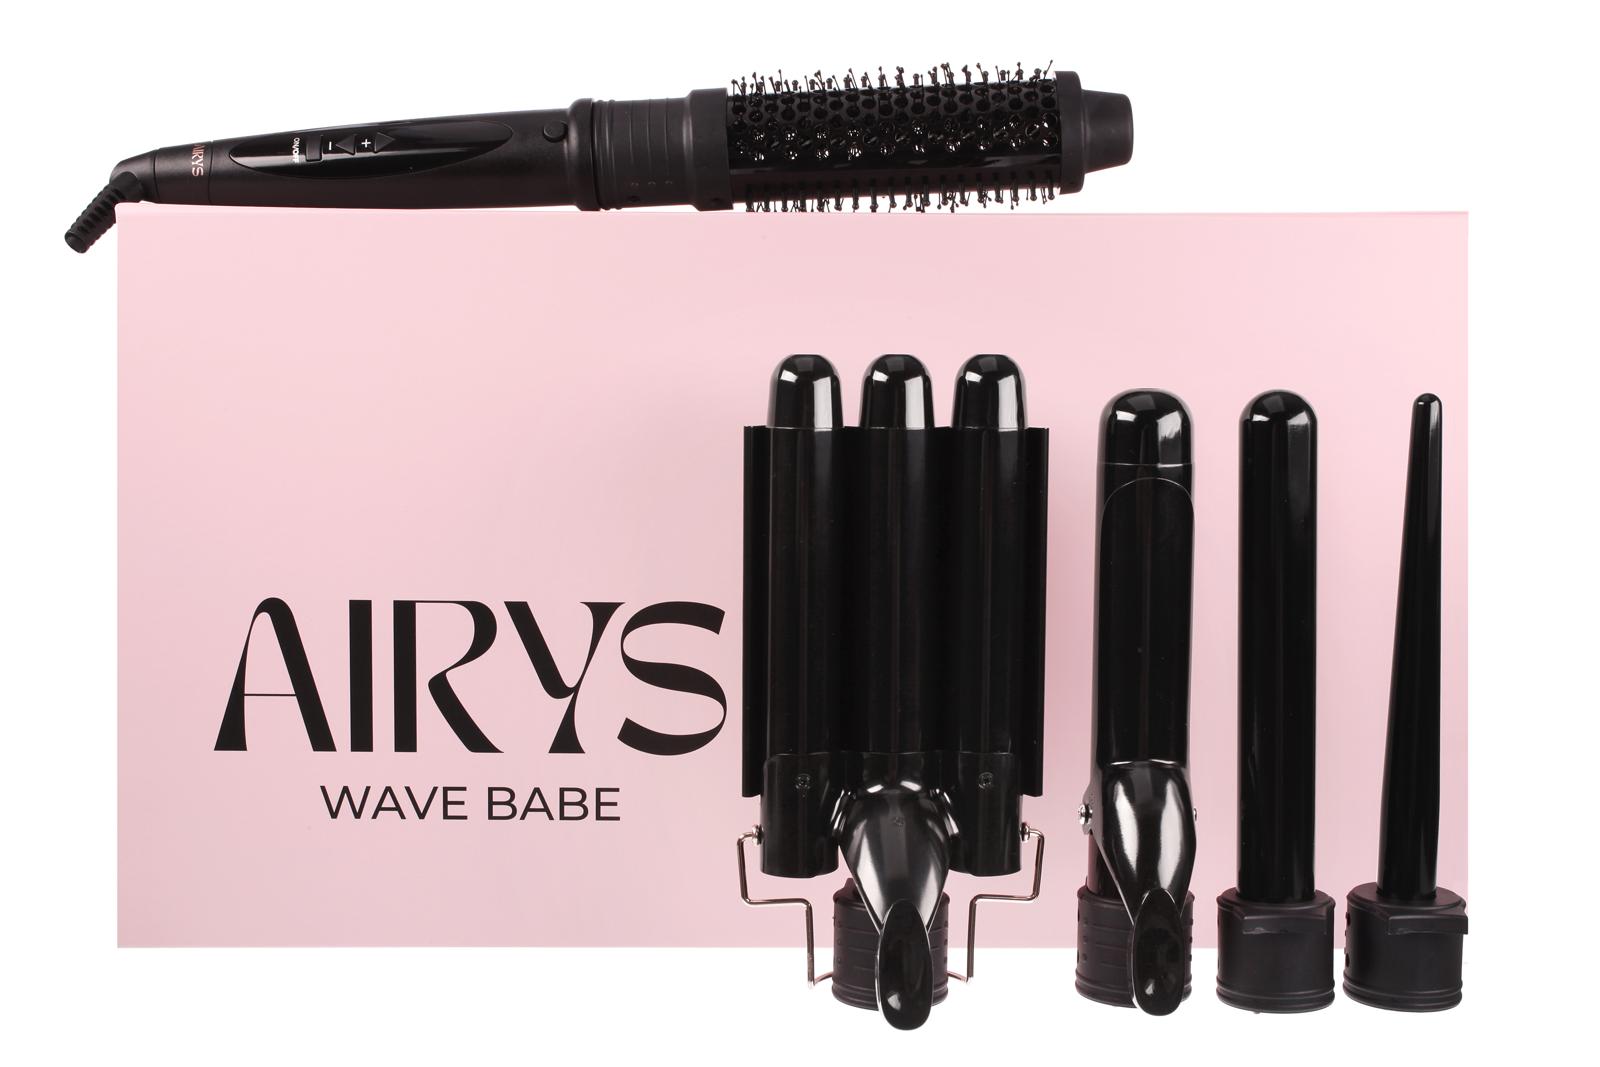 Wave Babe - Airys Hair - 5 in 1 hair styler - 5 in 1 styler - wavy talk - hair curler - curling tong - thermal brush - bouncy blowdry brush - mermaid waver - beach wave - interchangeable head - hair styling attachments - curling wand - blowout brush